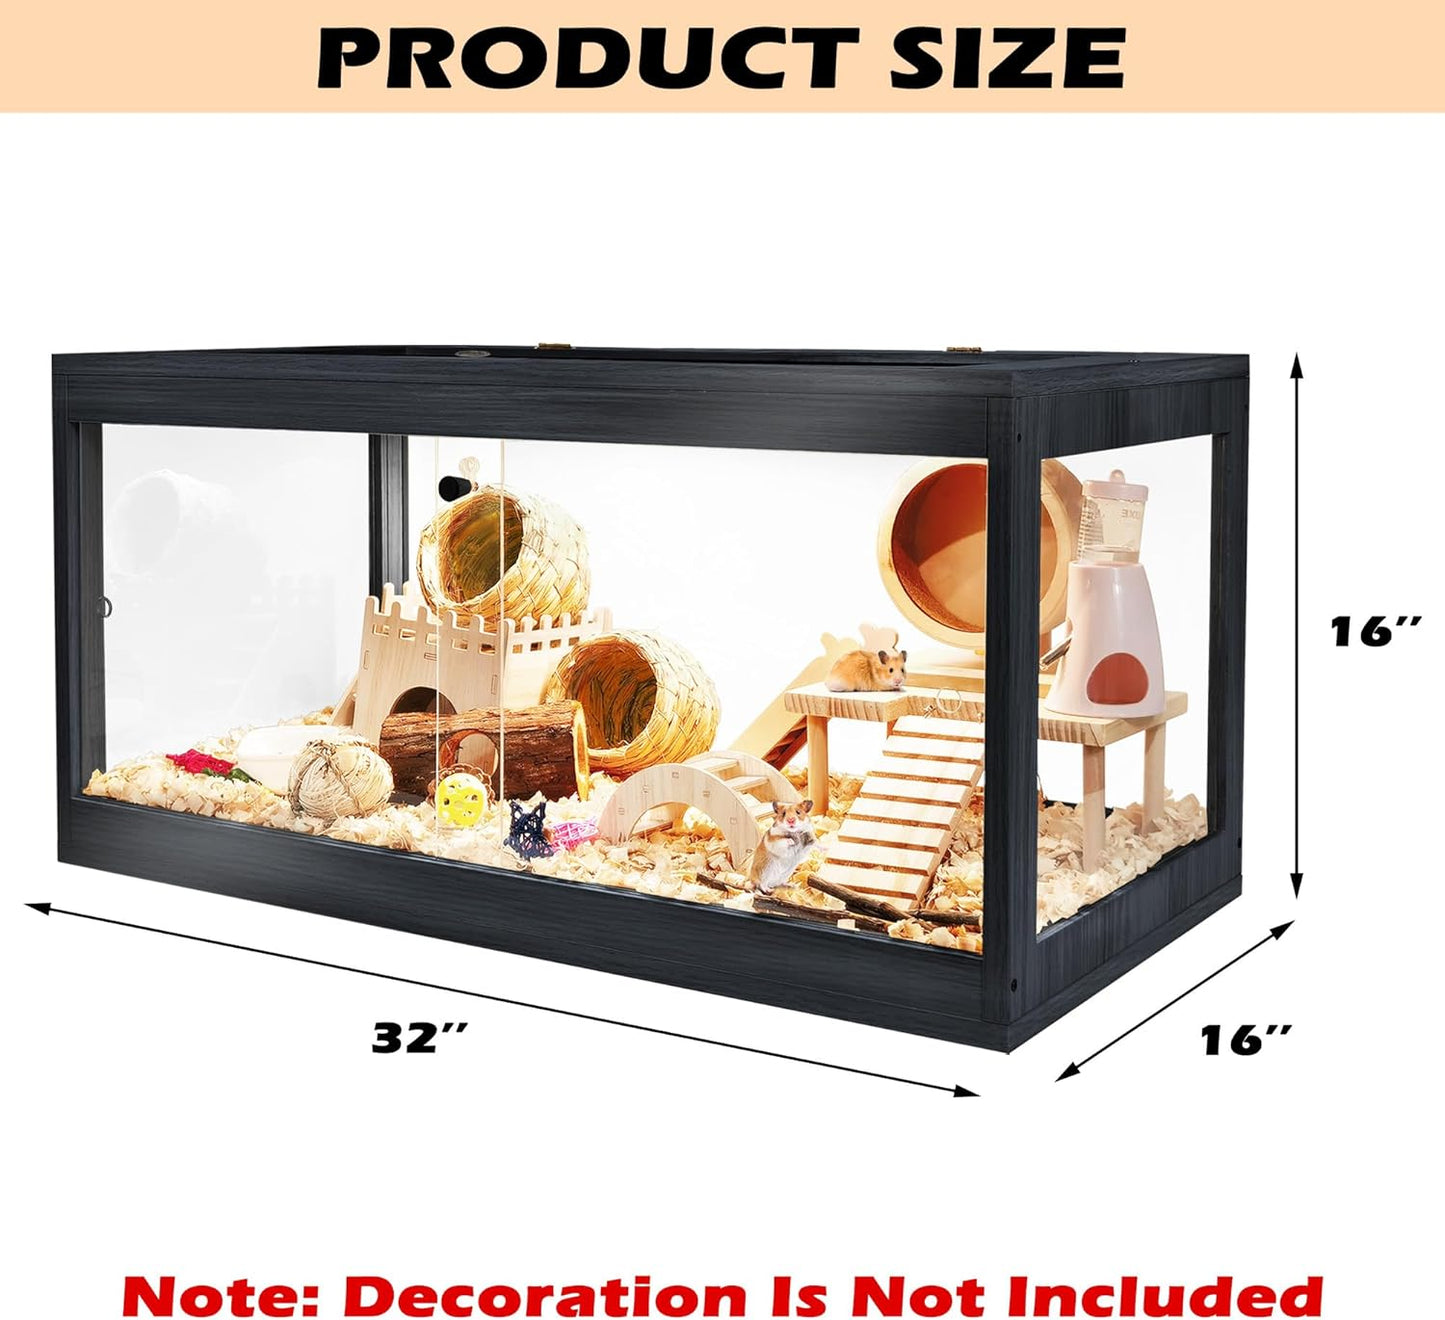 Prolee Hamster Cage Wooden 32 Inch Mice and Rat Habitat Openable Top with Acrylic Sheets Solid Built with Lock Design, Bl